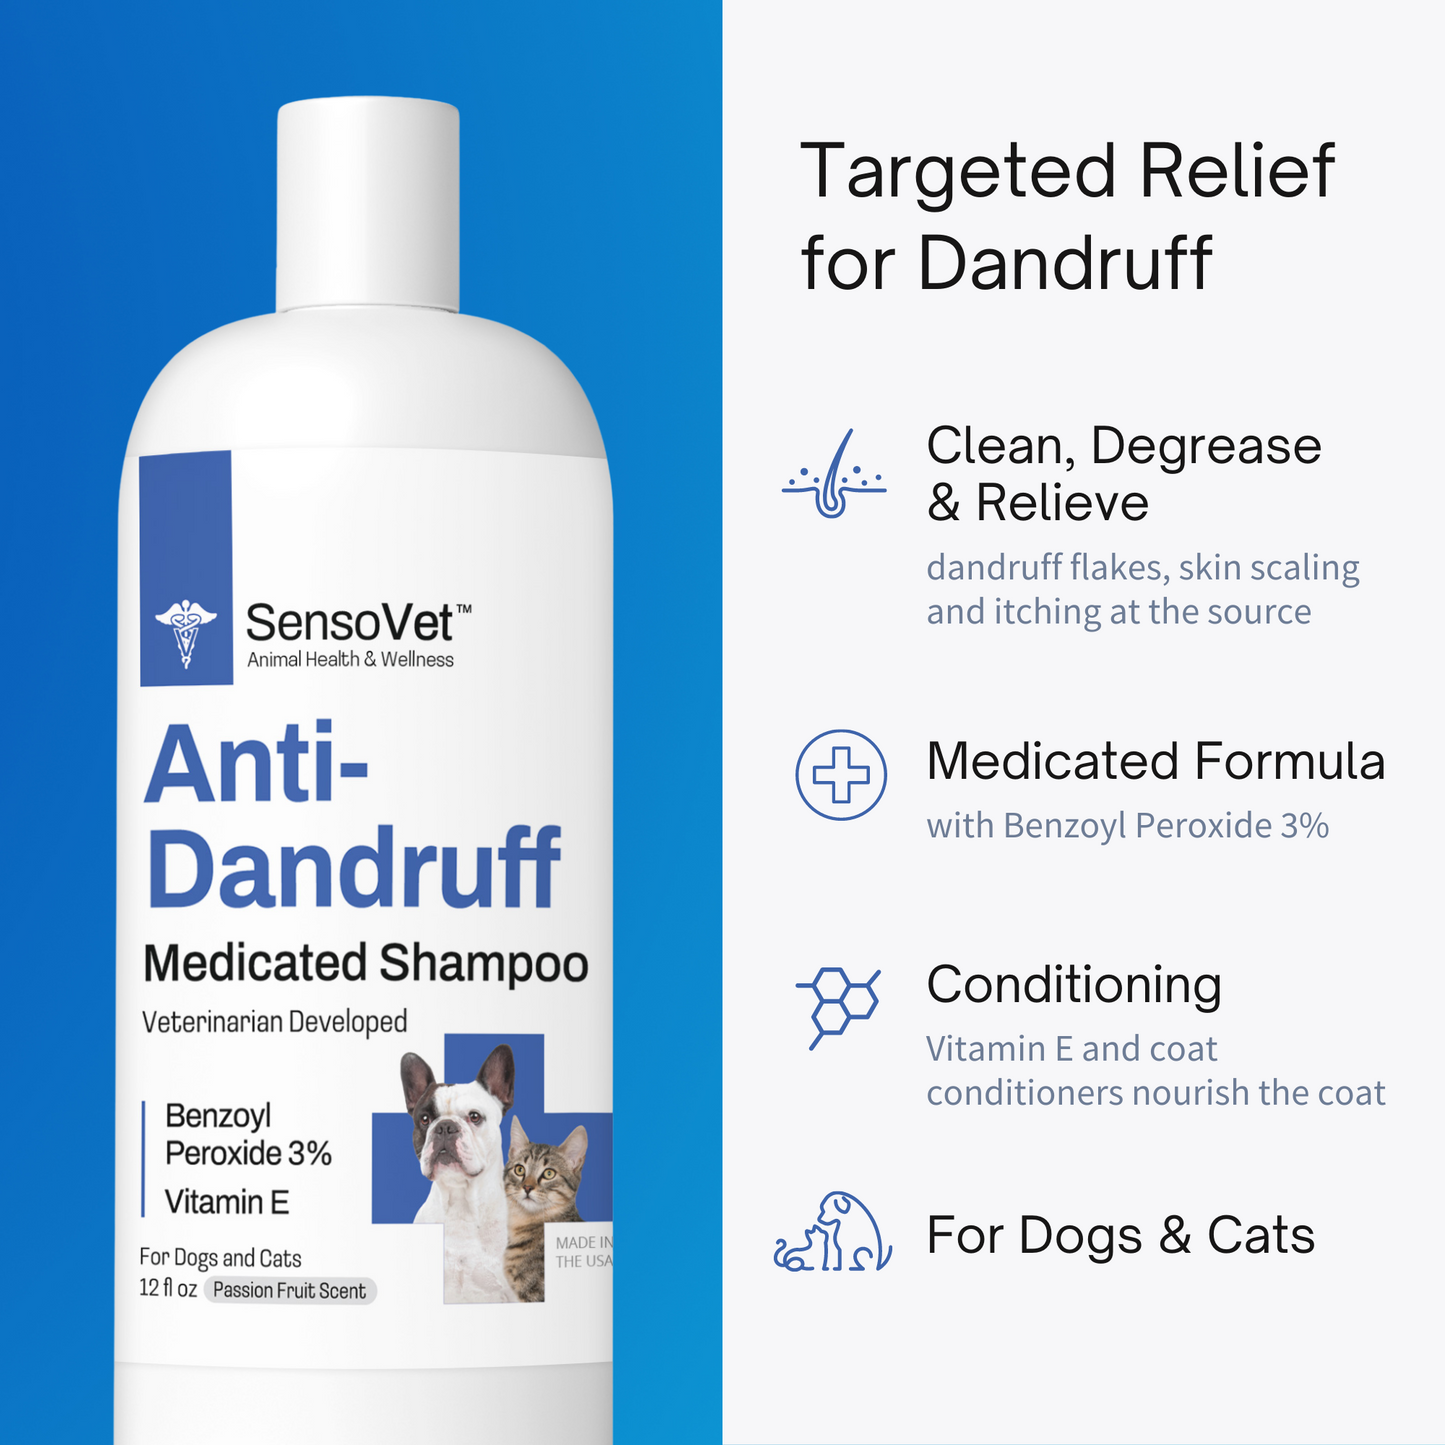 Targeted relief for dandruff for your pet